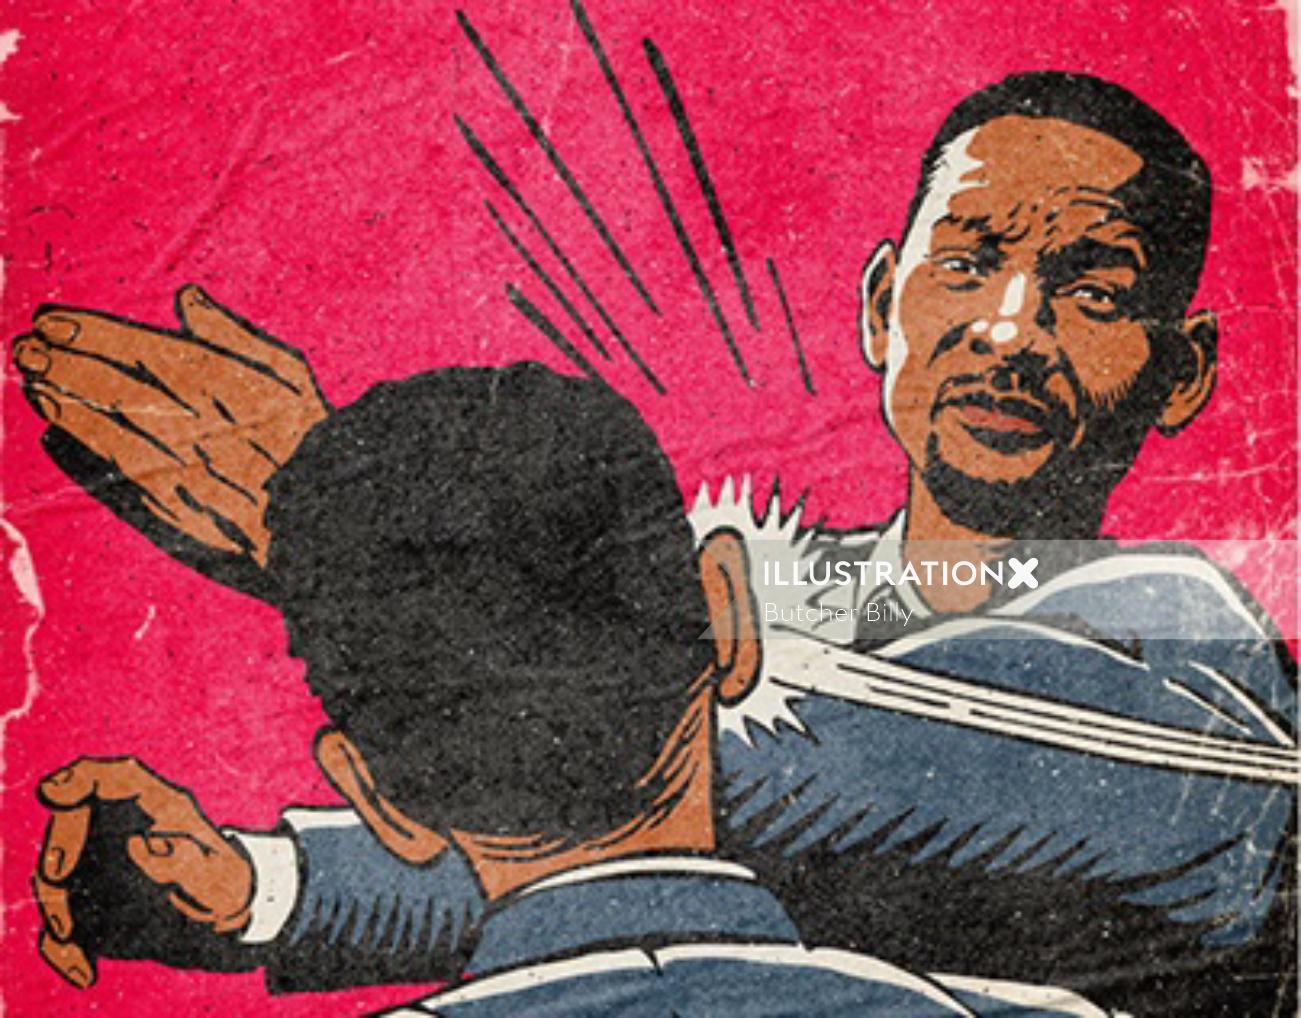 The comic illustration of Chris Rock was slapped by Will Smith at the Oscars